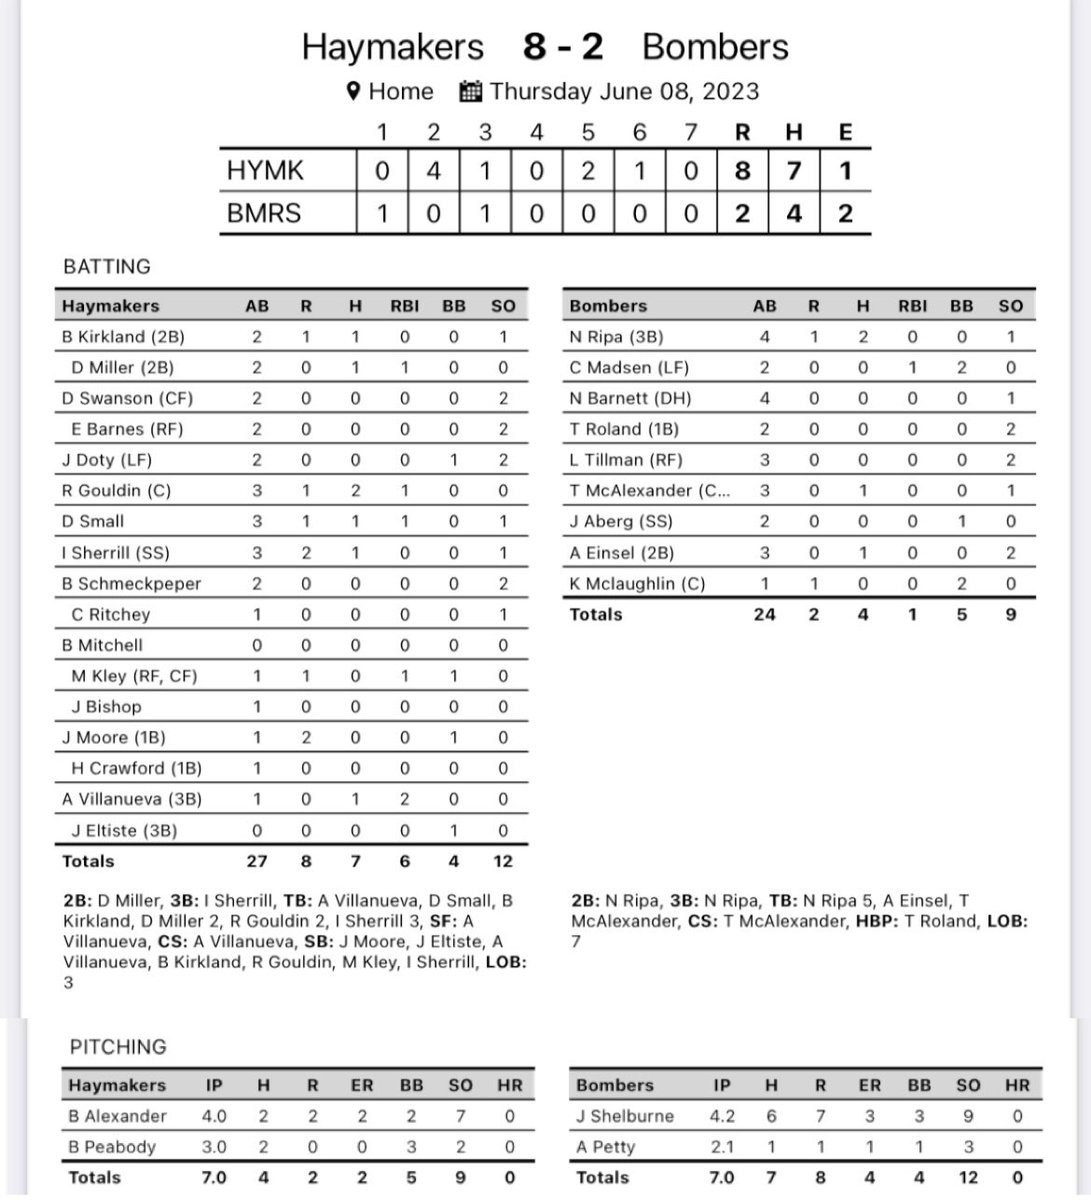 Haymakers run away early with the lead for the victory

FINAL:
Haymakers 8
Bombers: 2

Top performers:
Ryan Gouldin: 2-3 1RBI, 1R
Garrett Siemsen: 1-2 3B, BB, 1RBI, 1R
Braxten Alexander: 4IP, 2ER, 2H, 7K, 2BB